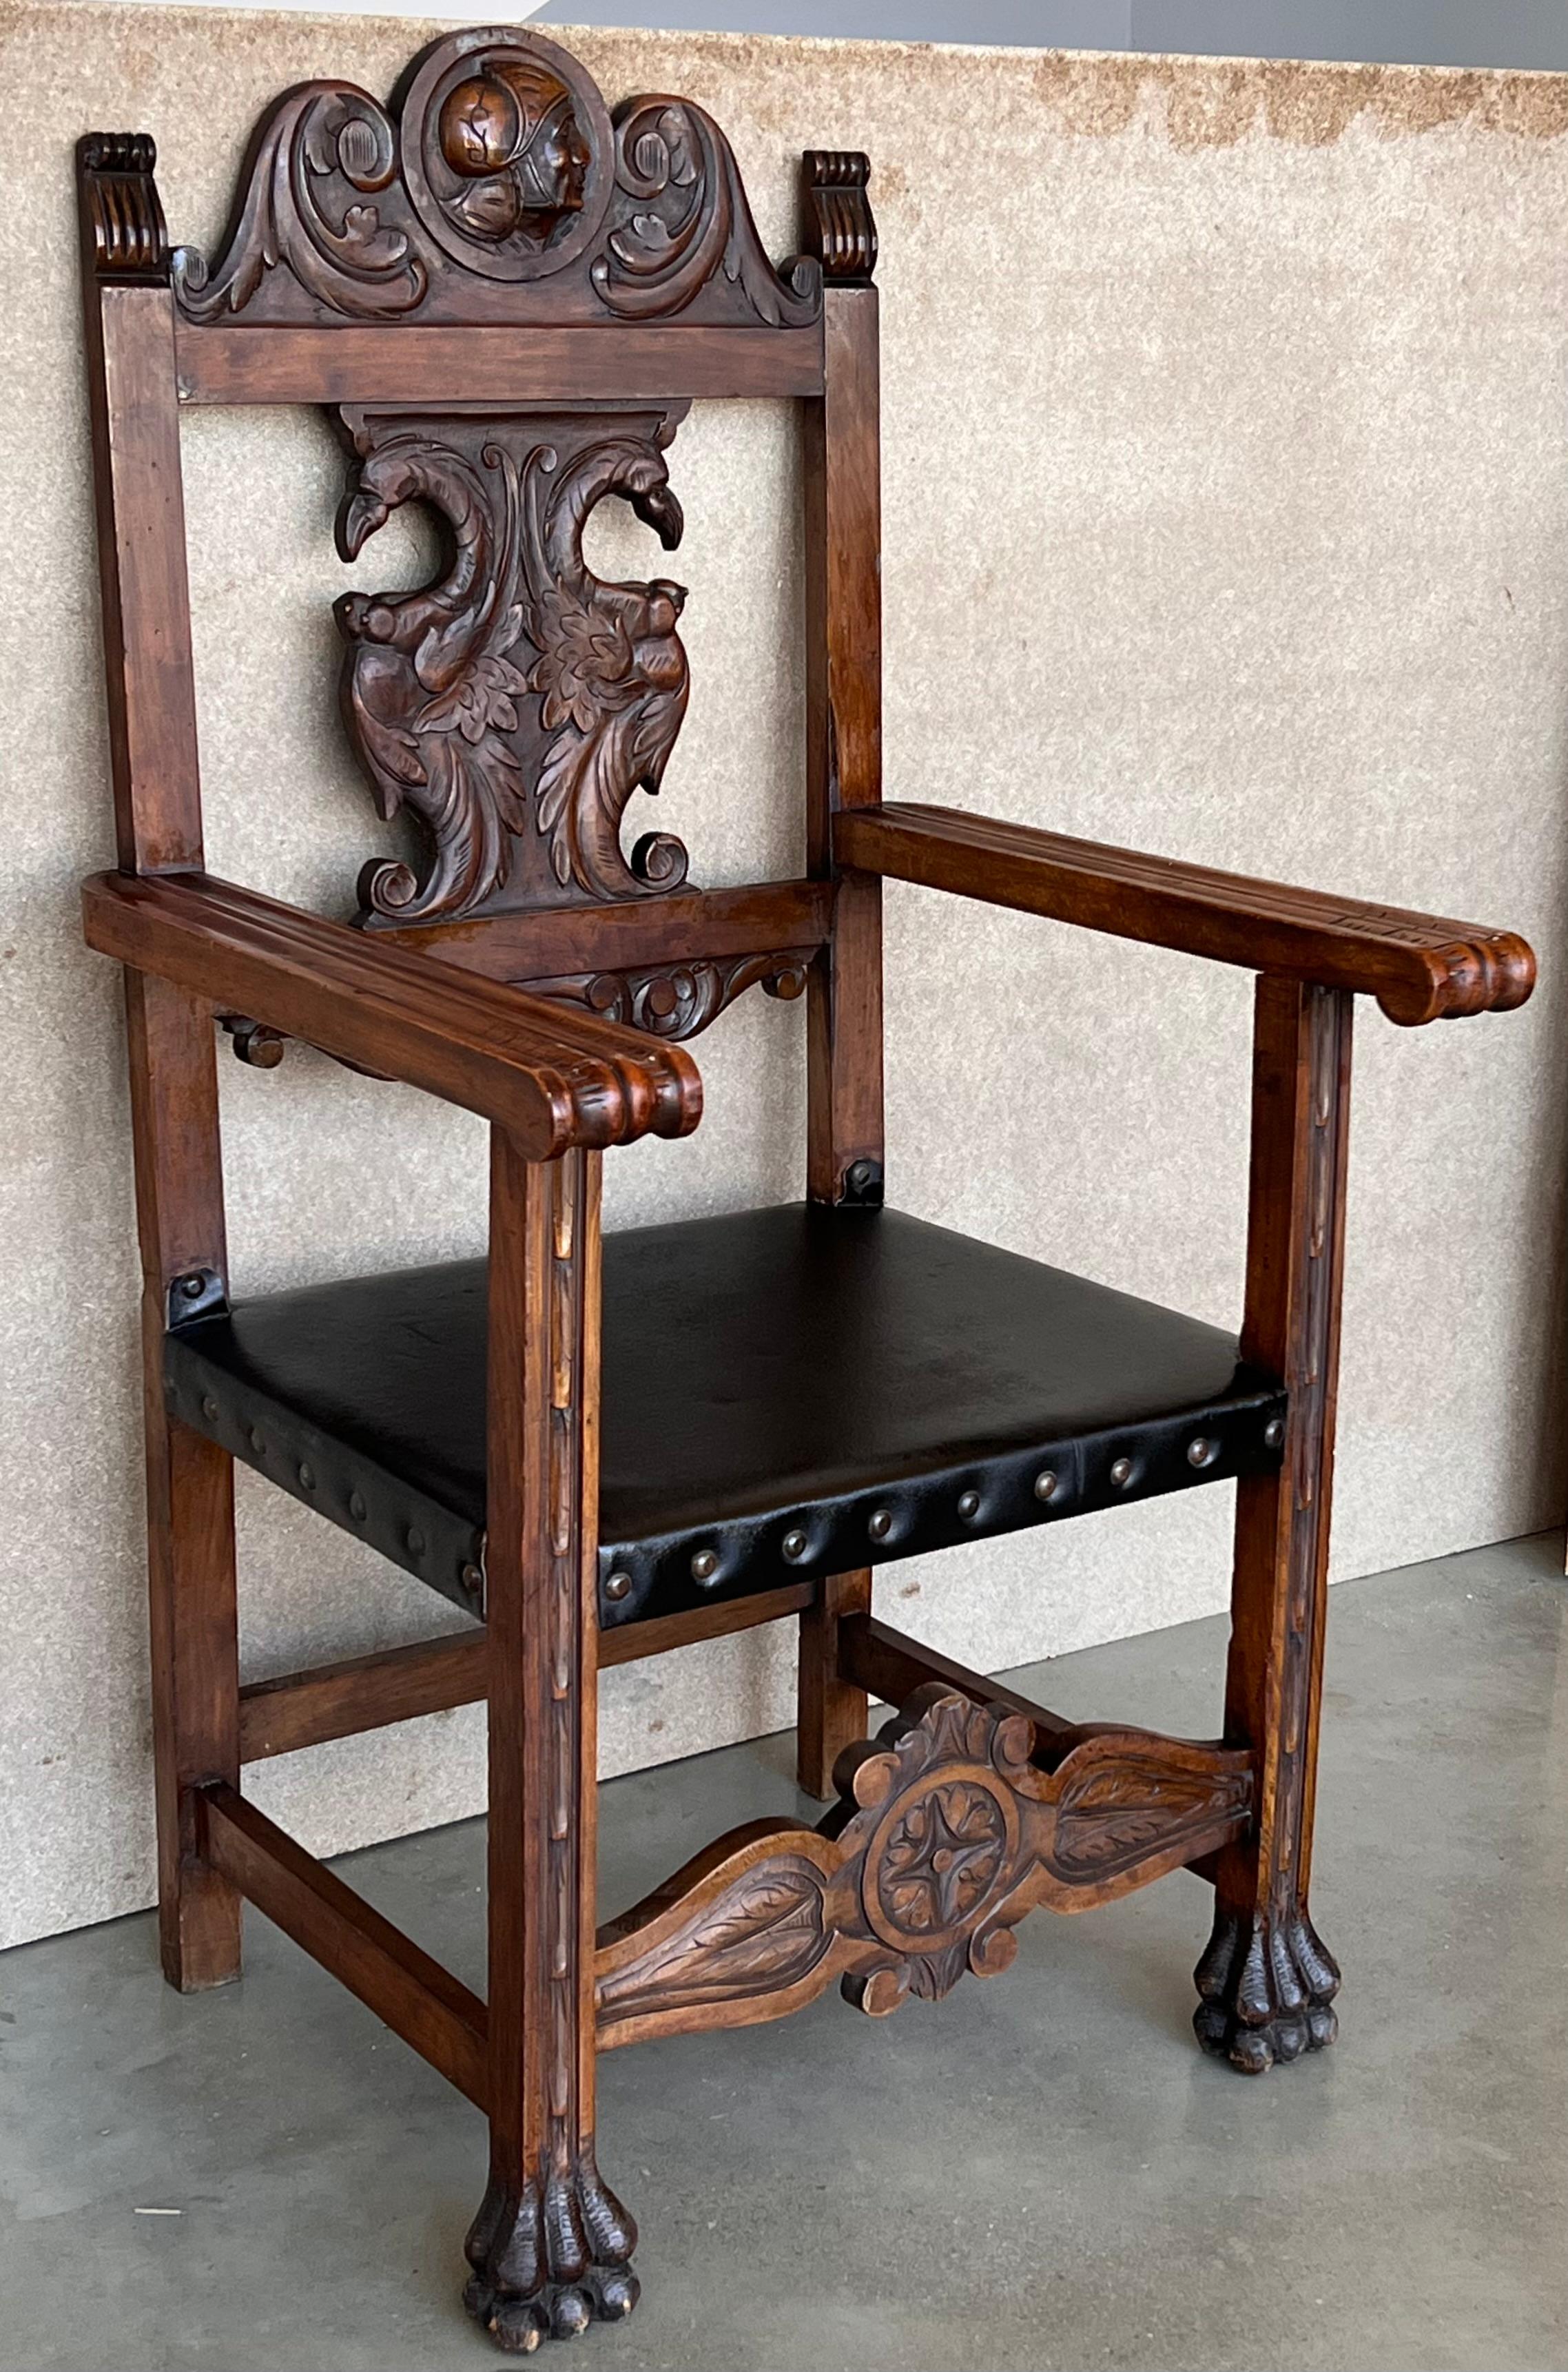 19th century carved walnut turned wood armchair.
Perfect to place in your room or in your office with the table desk together.
The frames with carved arms and structure. The legs are finished in a higly carved claw feet.
It has a leather seat.